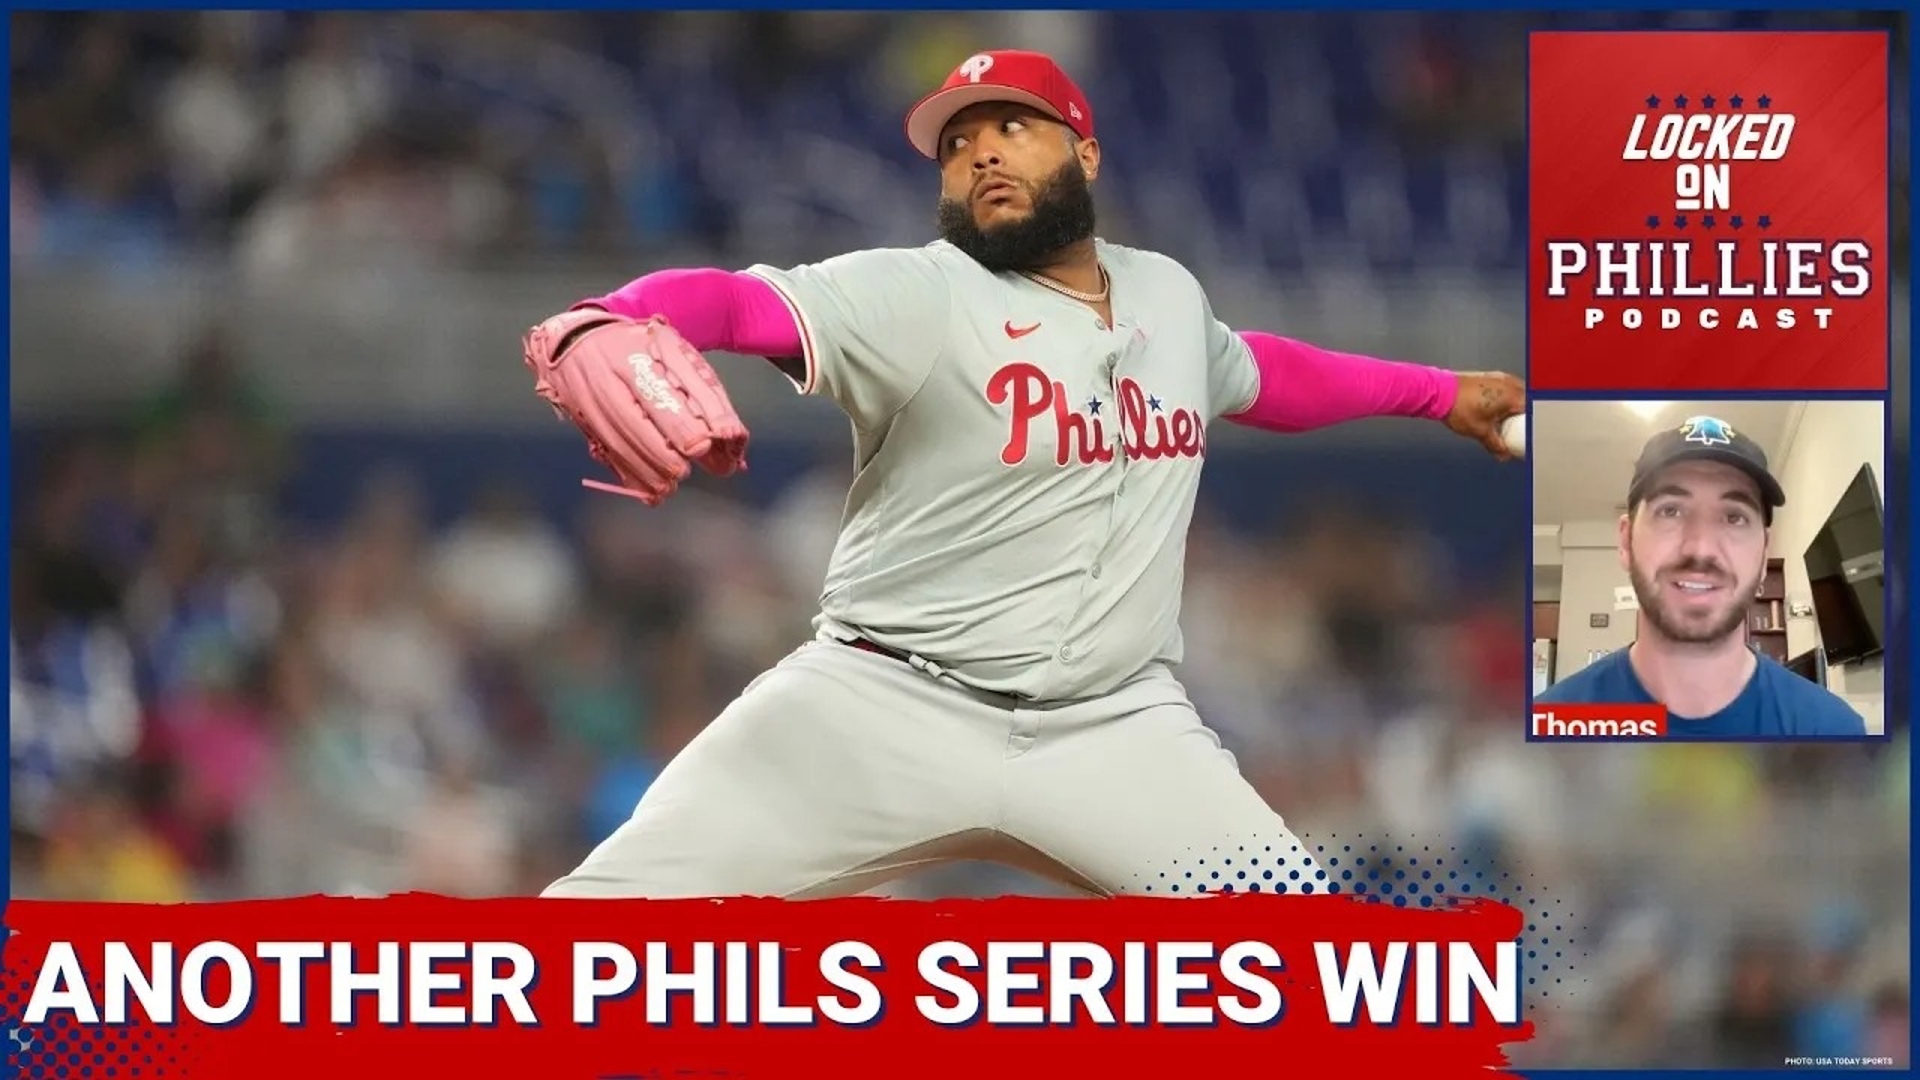 In today's episode, Connor discusses the Philadelphia Phillies' series win over the Miami Marlins down in Florida.